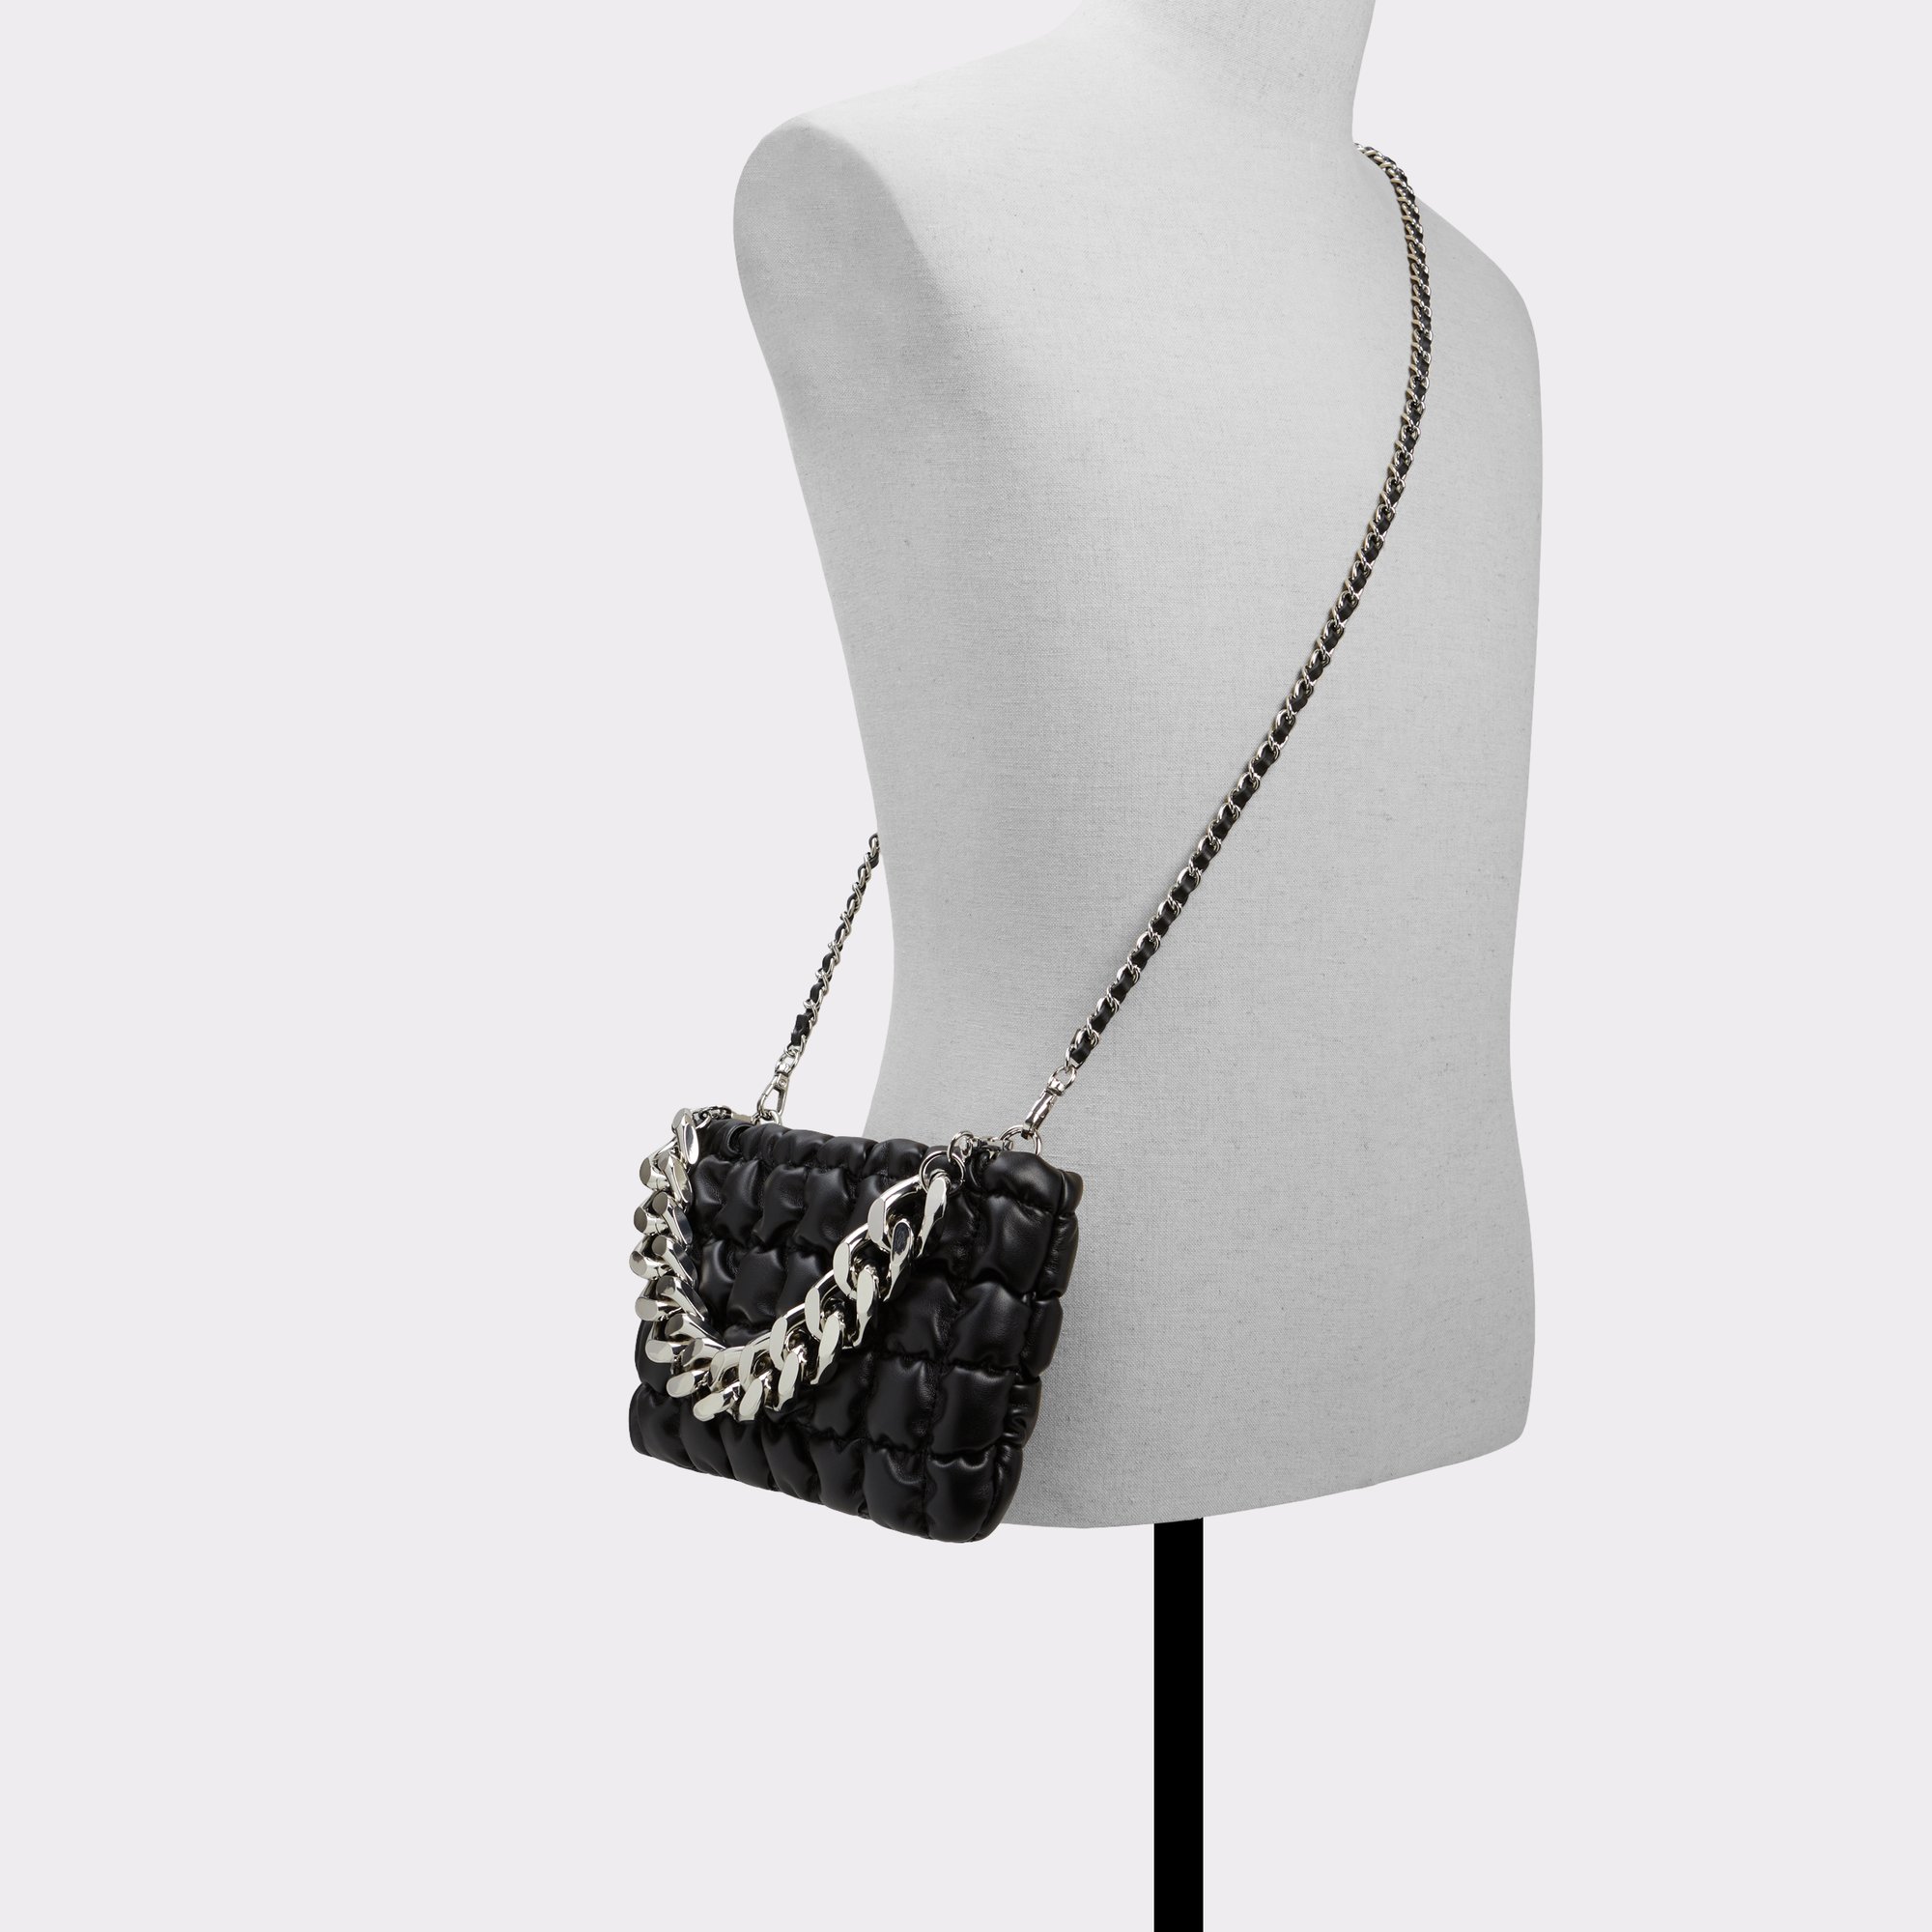 Chunky Chain Strap Quilted Shoulder Bag - ShopperBoard